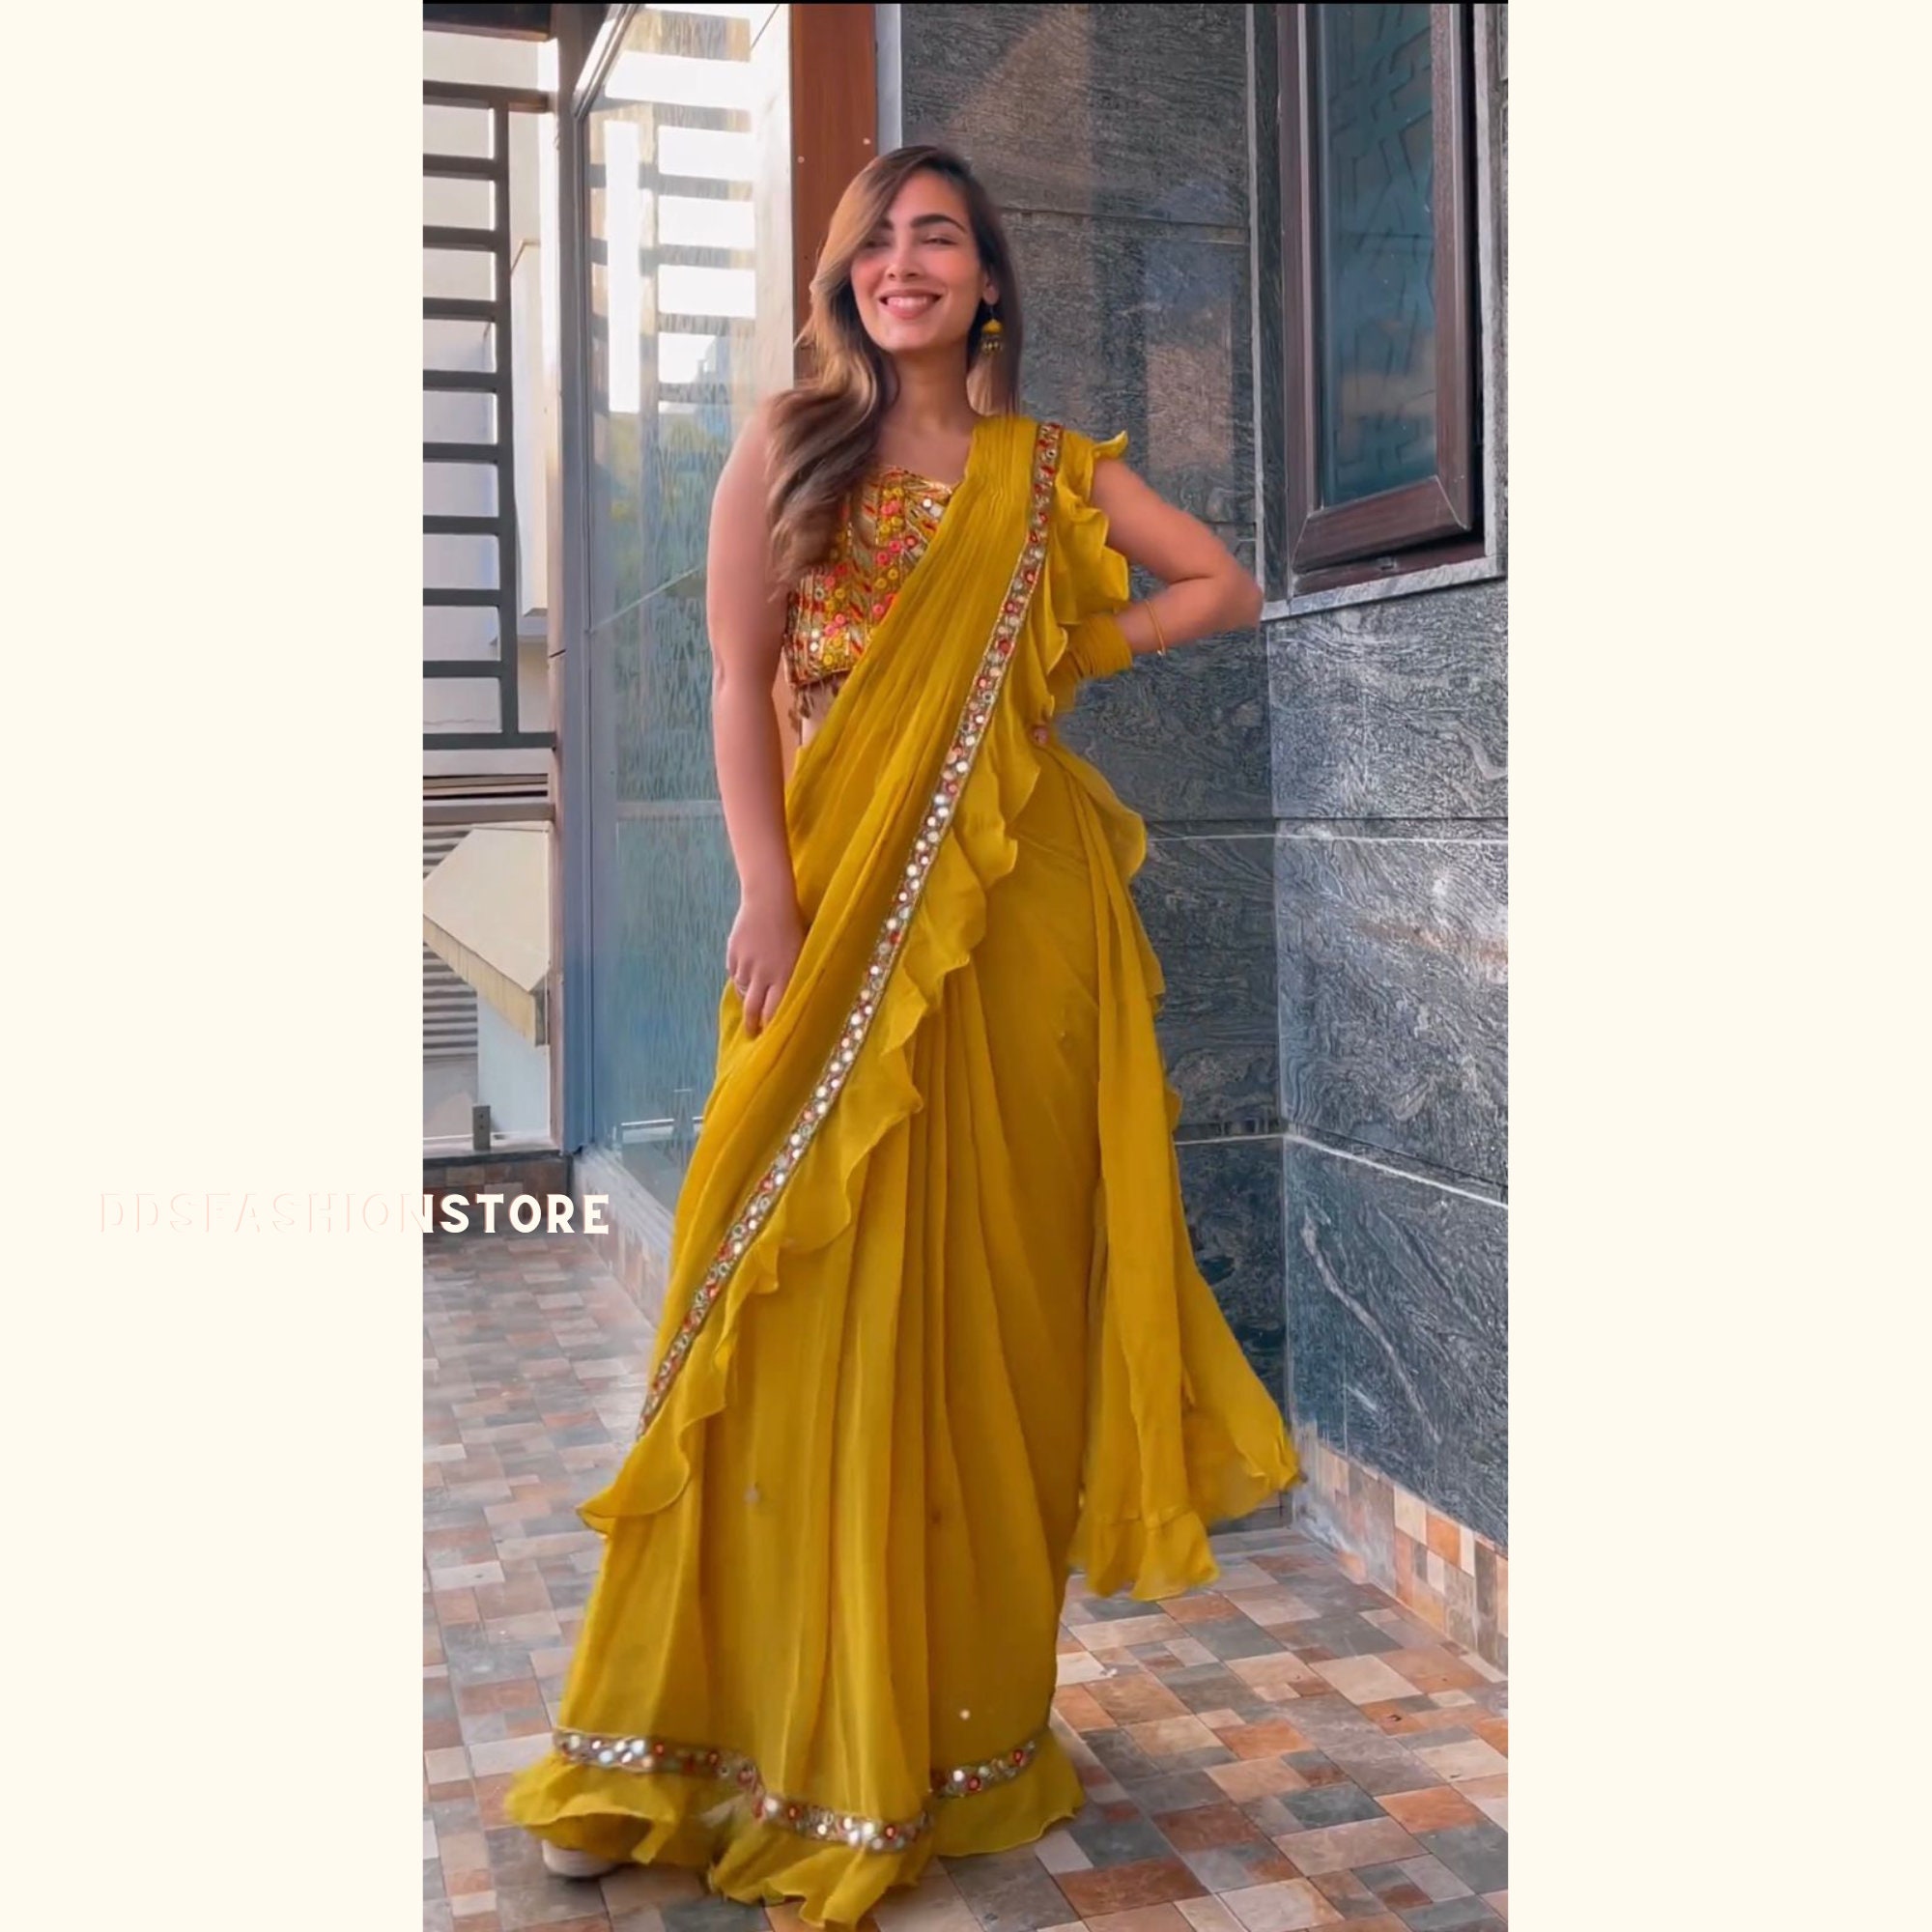 Ready to Wear Saree Yellow Mirror Work Partywear Outfit, Indian Premium  Embroidery Readymade Saree Pre Drape Saree for Women / Girls 